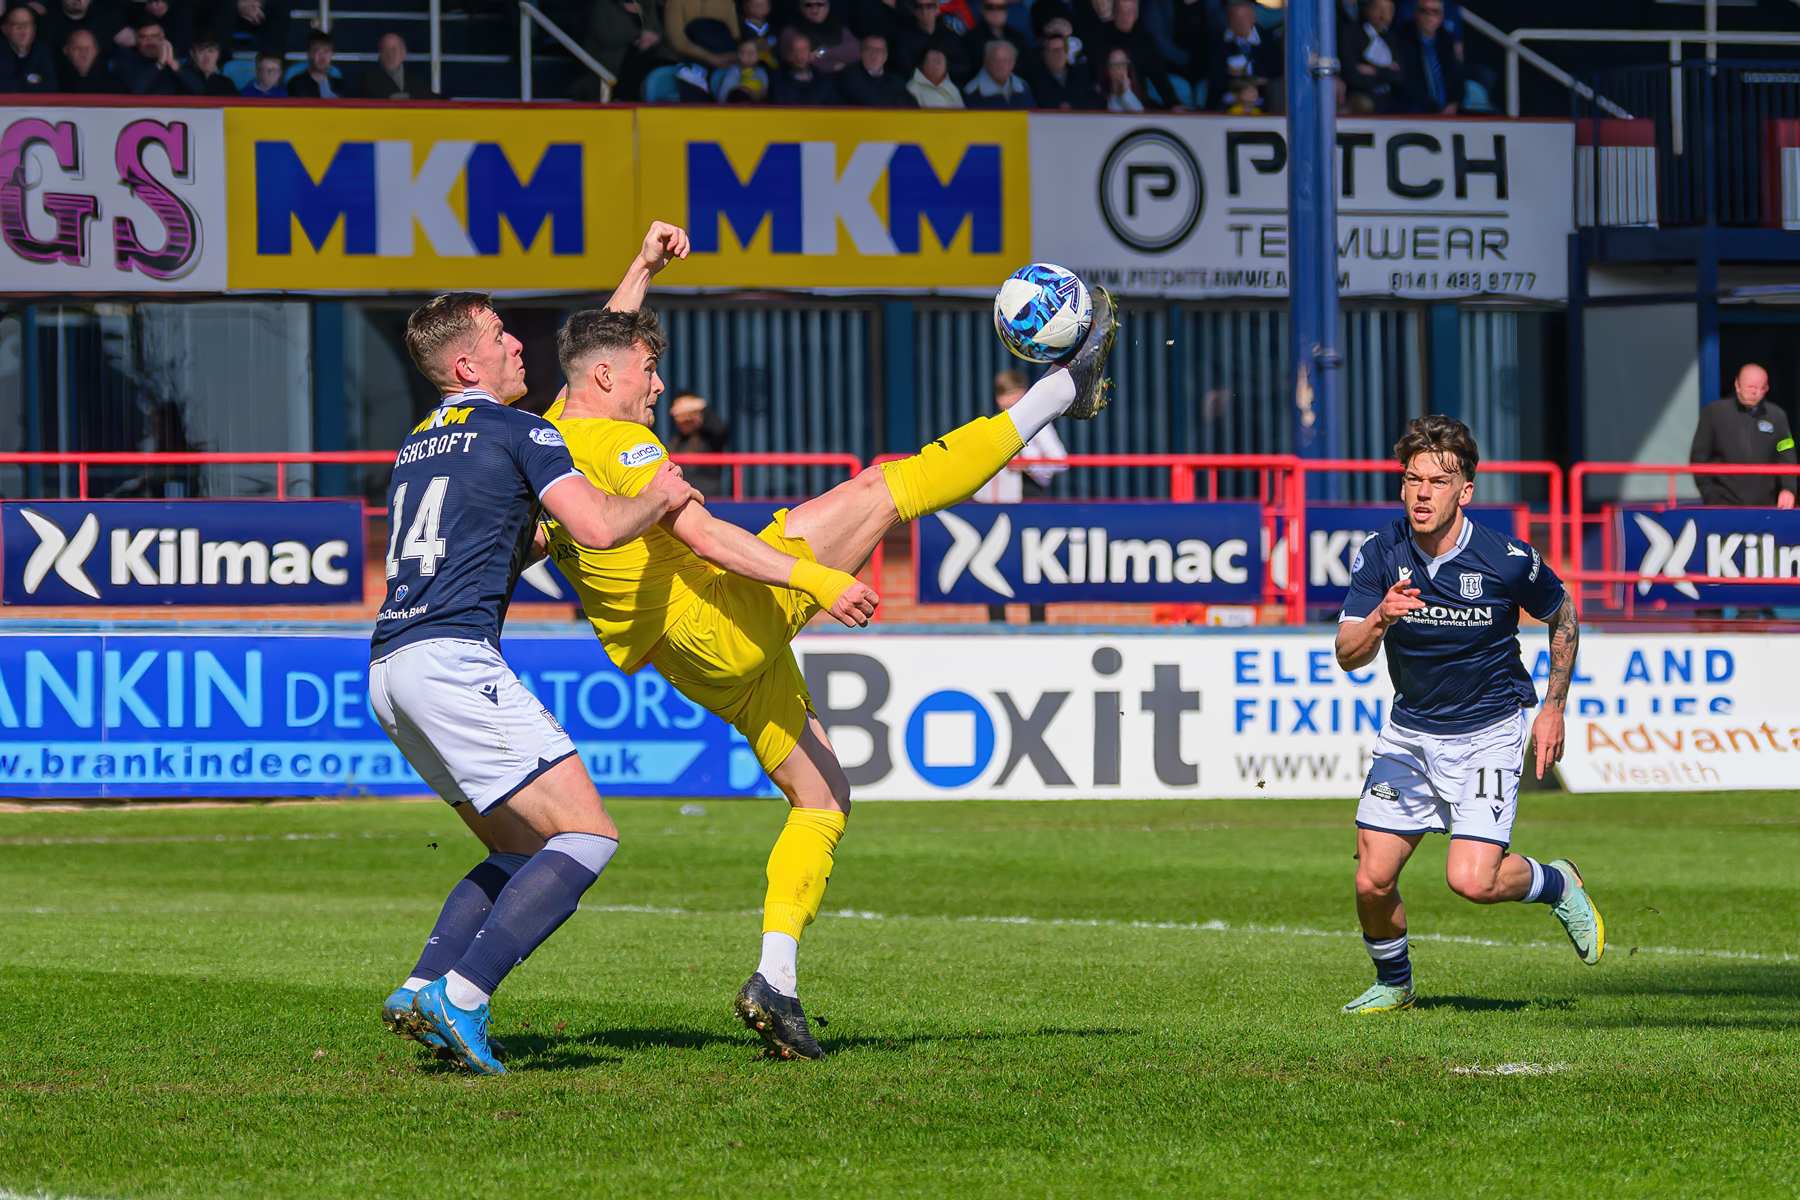 Darragh O'Connor gutted with draw after first Morton goal